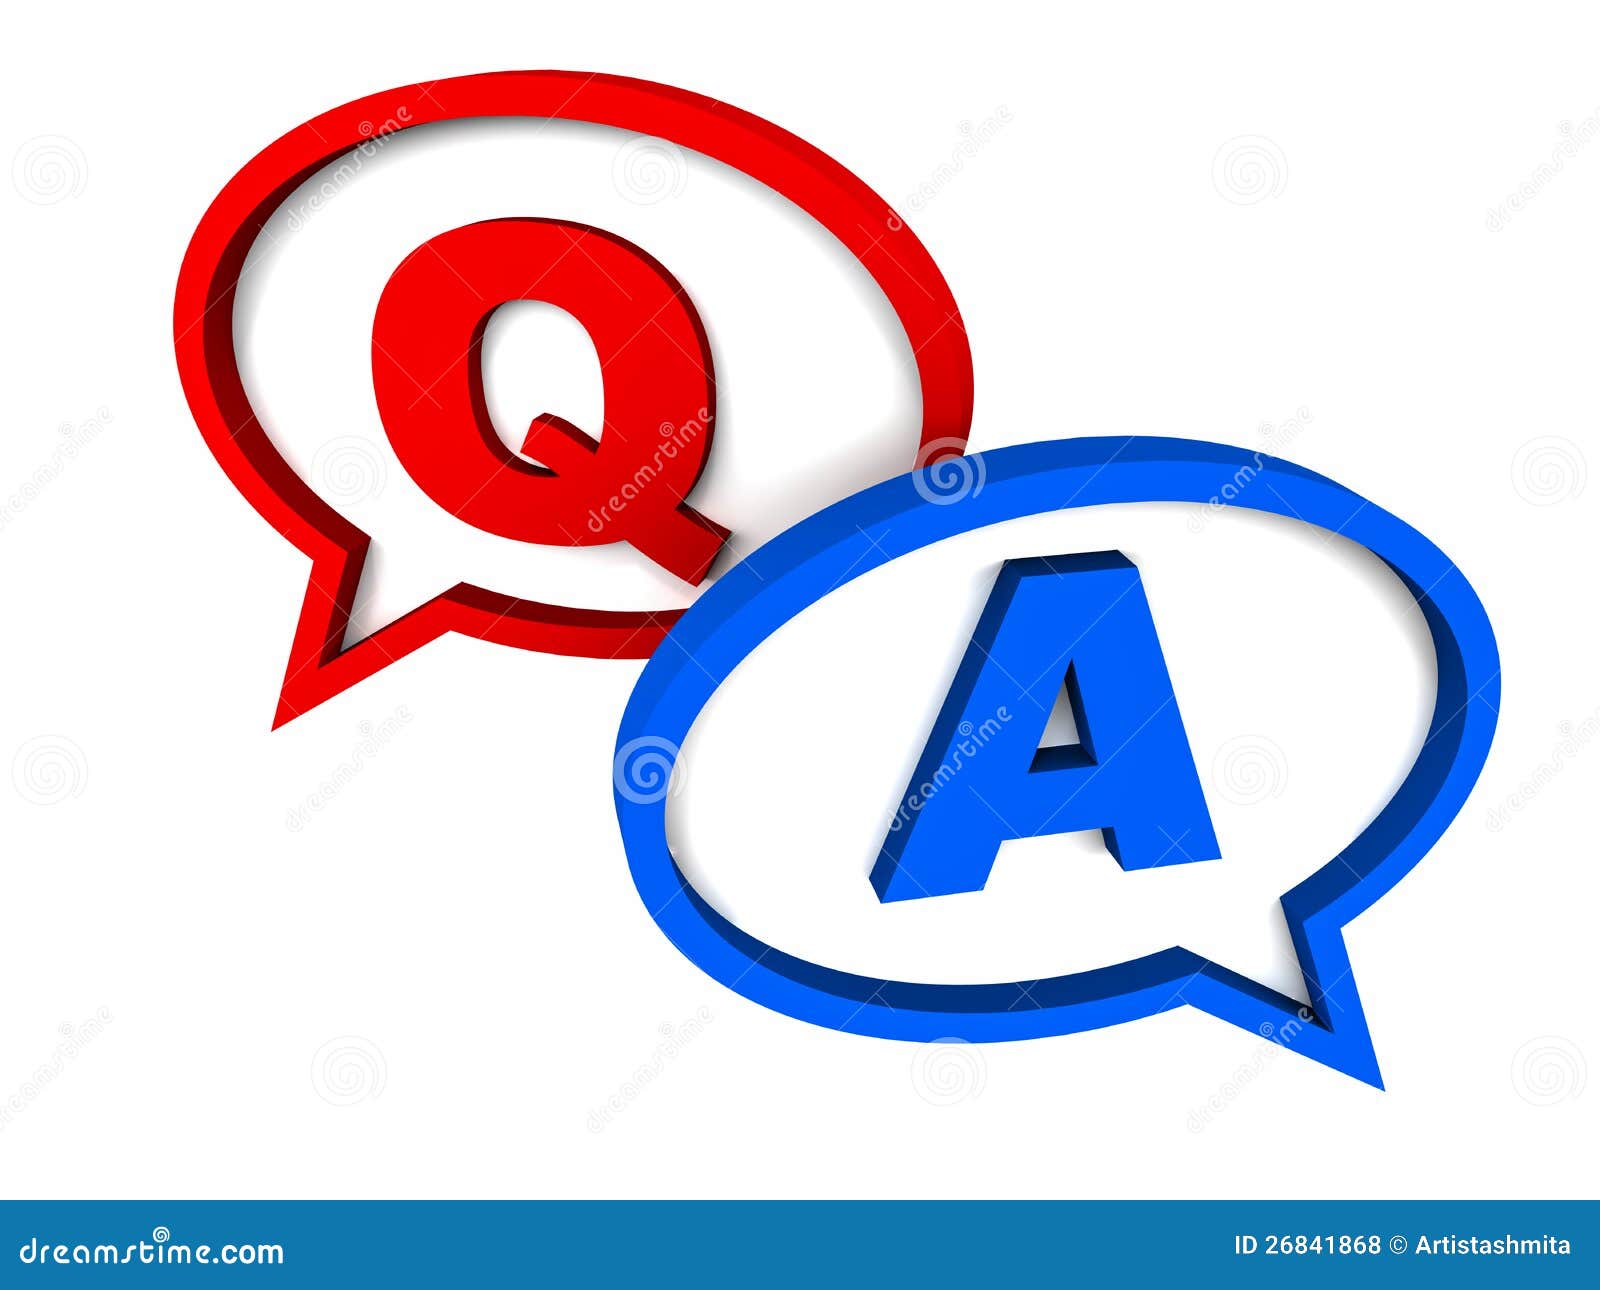 clipart question and answer - photo #26